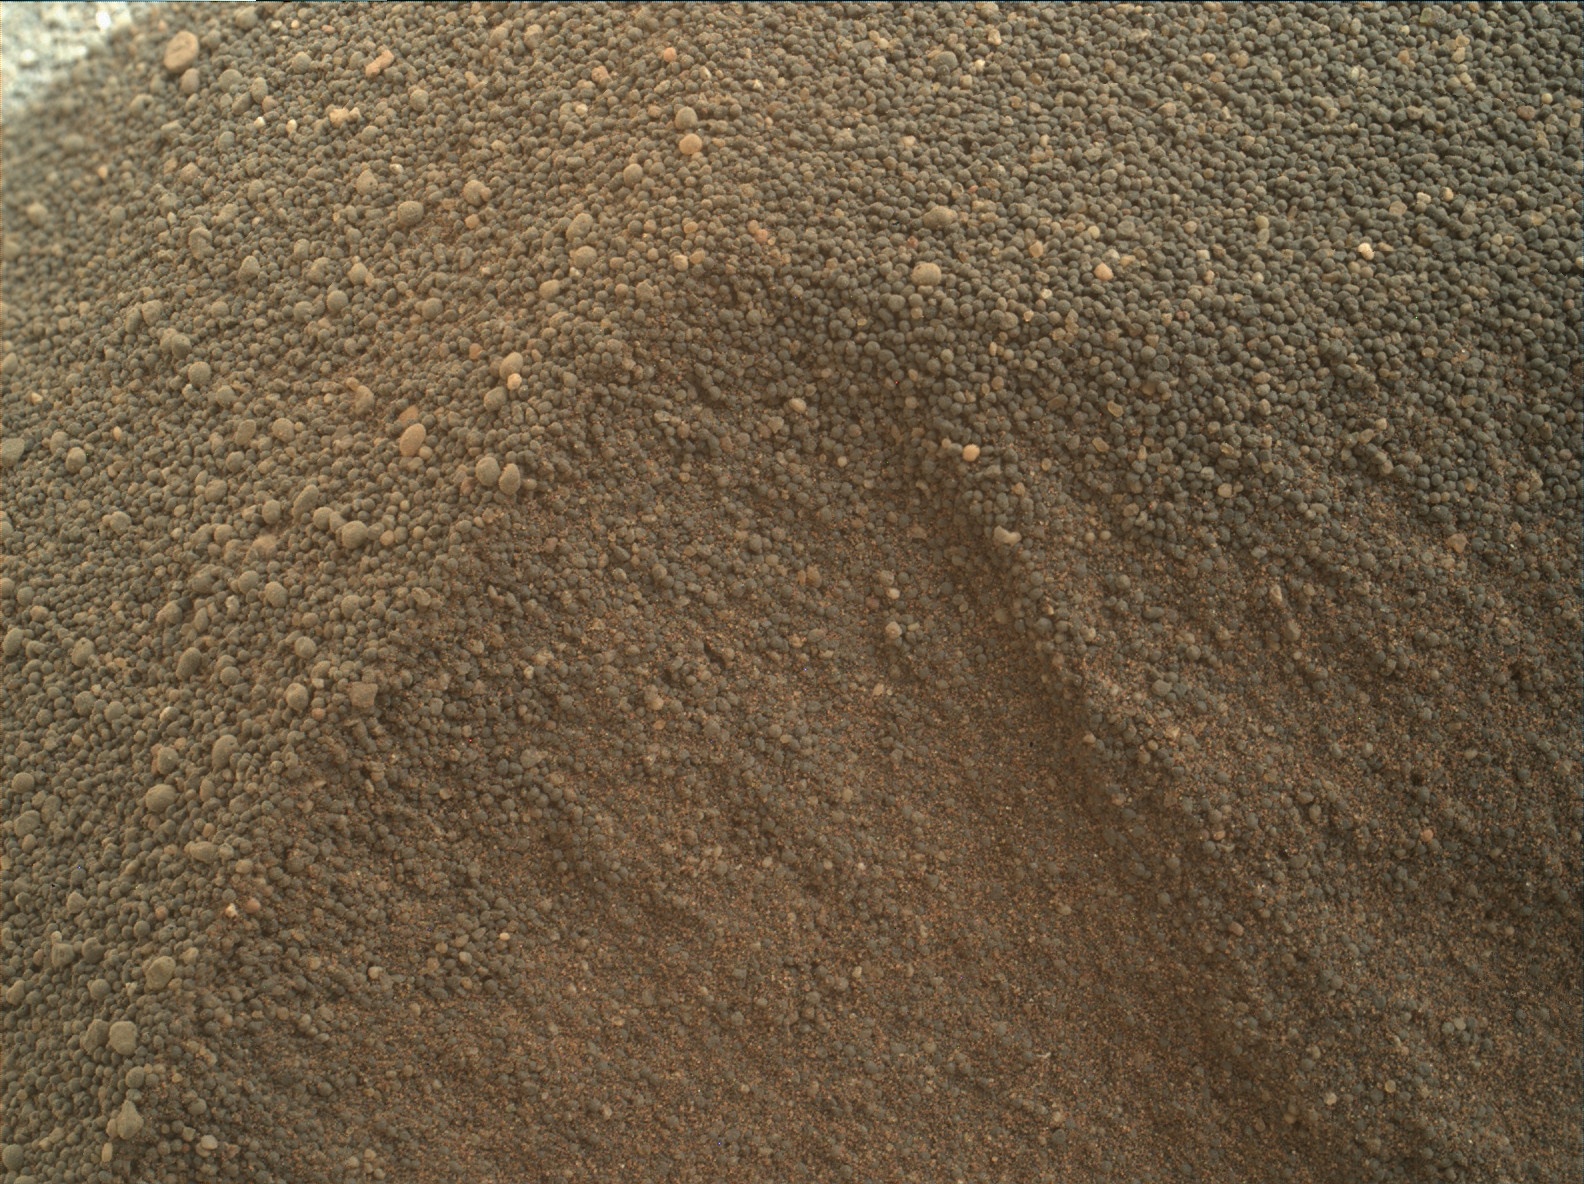 Nasa's Mars rover Curiosity acquired this image using its Mars Hand Lens Imager (MAHLI) on Sol 1751